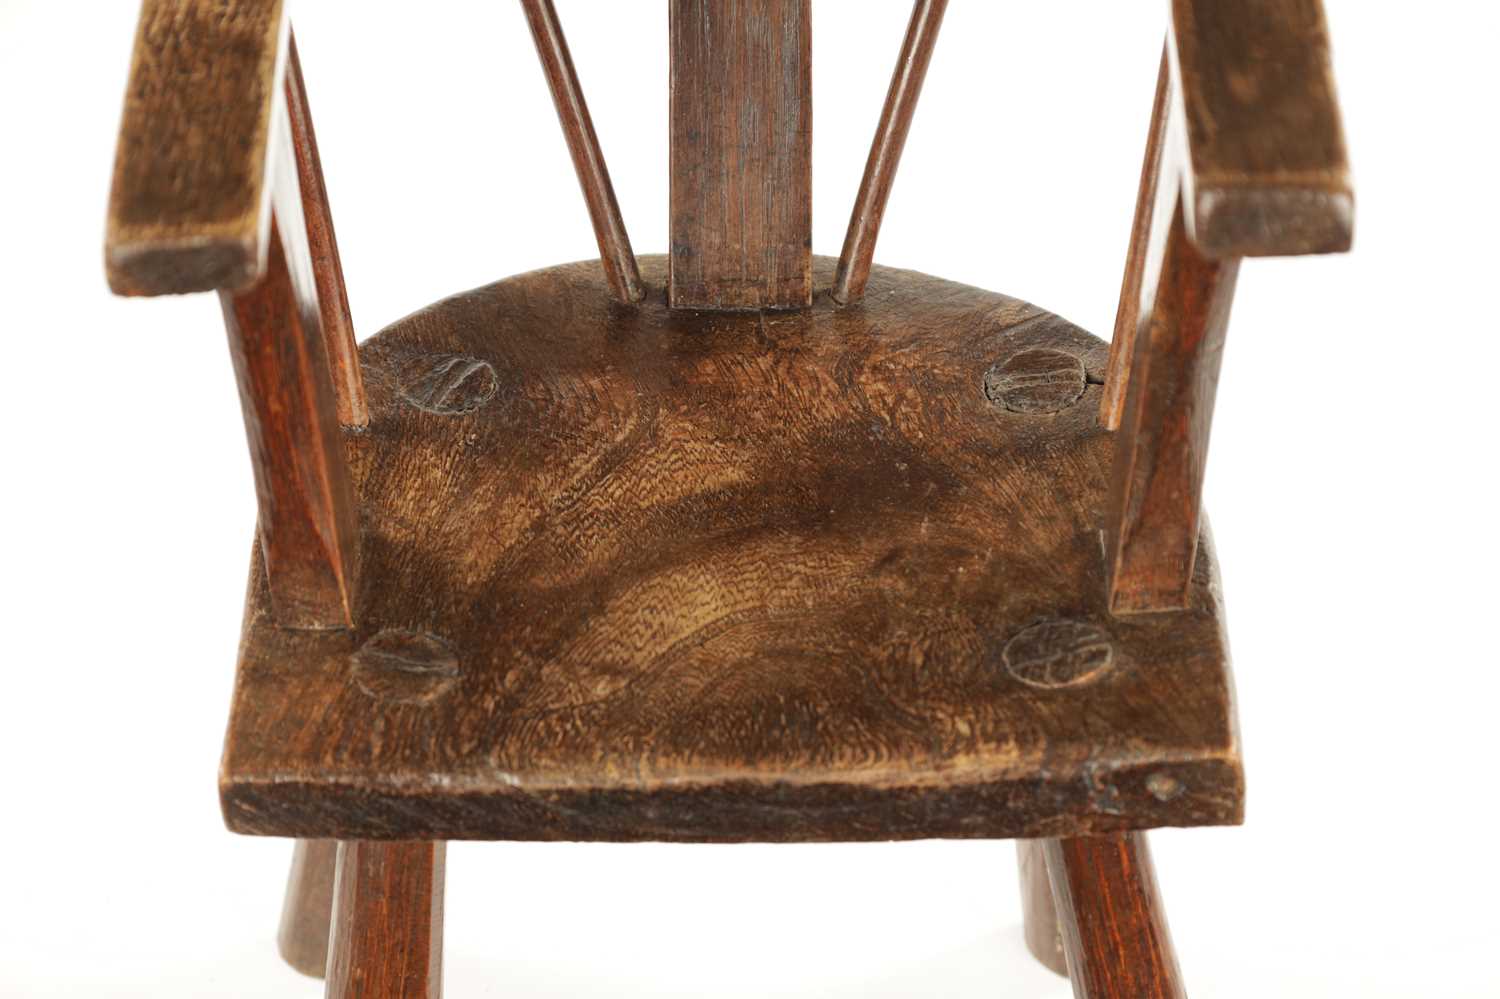 A RARE 18TH CENTURY PRIMITIVE ASH AND ELM CHILD’S CHAIR - Image 4 of 7